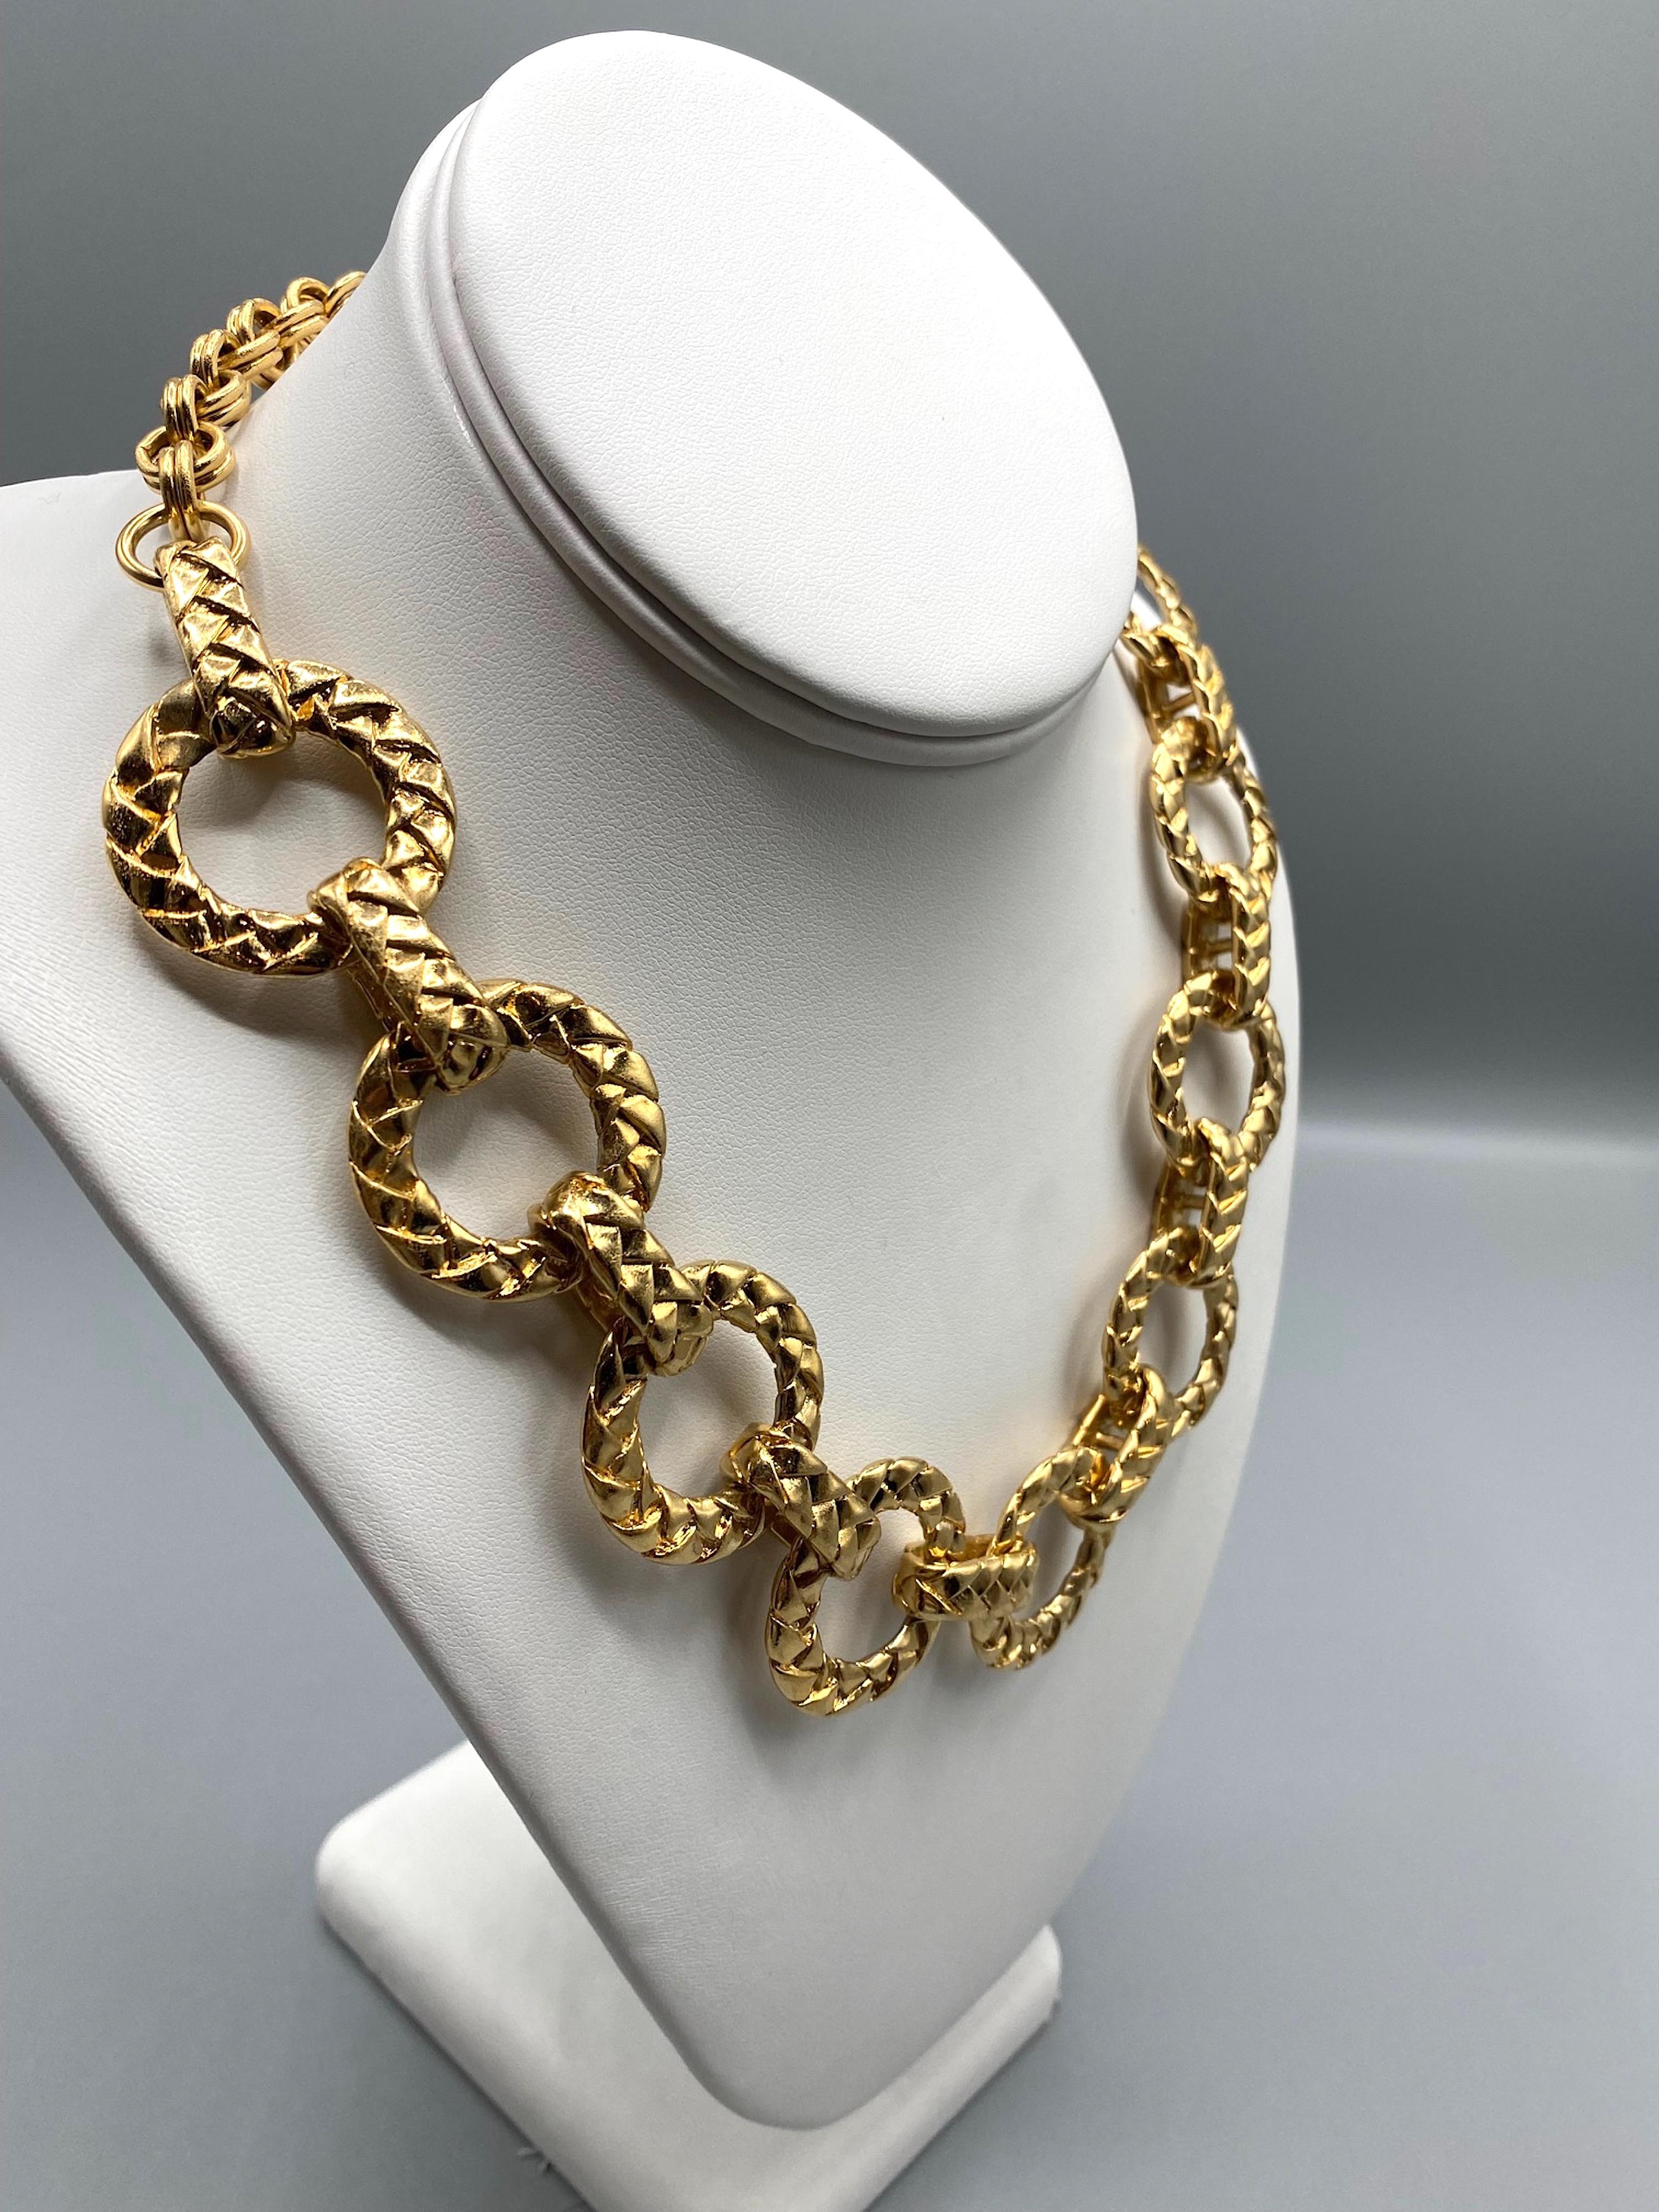 Yves Saint Laurent 1980's Round Quilt Link Chain Necklace For Sale 4